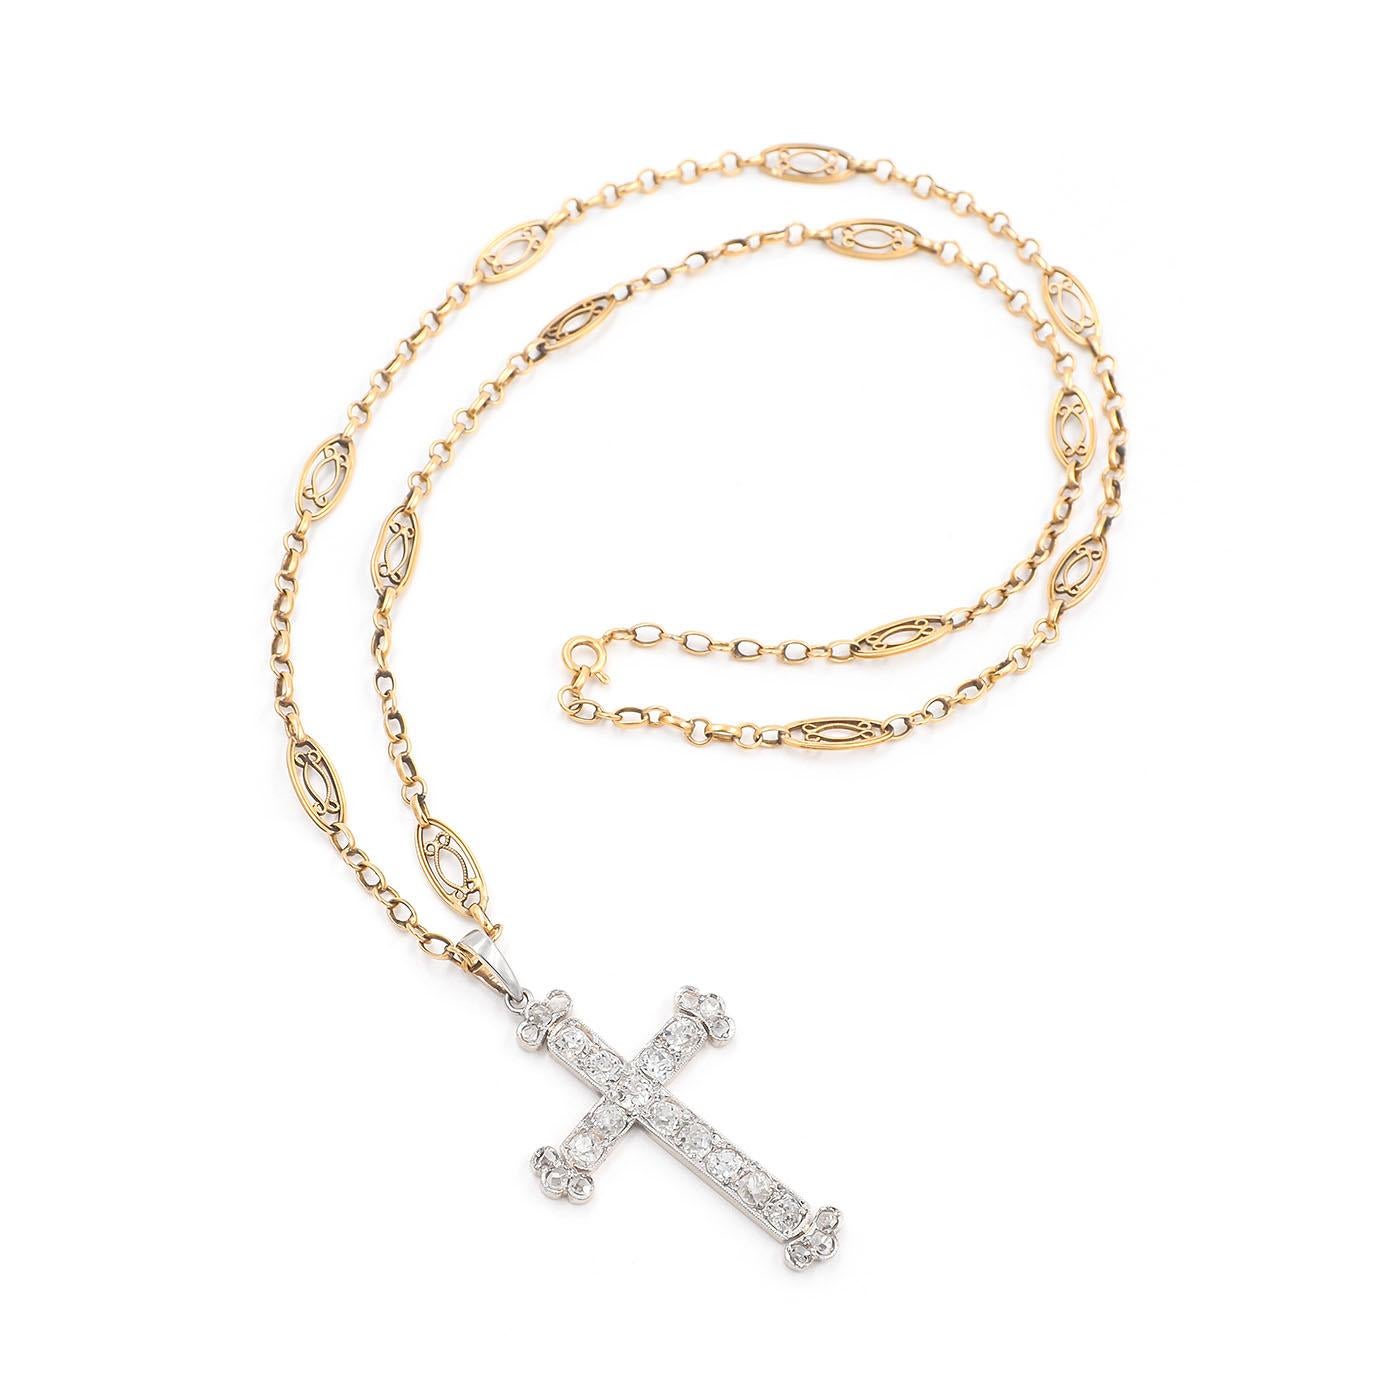 Edwardian Old Cut Diamond Cross Pendant & 18k Gold Chain Necklace. The Edwardian era cross pendant is composed of platinum & 18k yellow gold; it is set with 24 diamonds, a combination of Old Mine Cut and Rose Cut diamonds weighing approximately 2.18